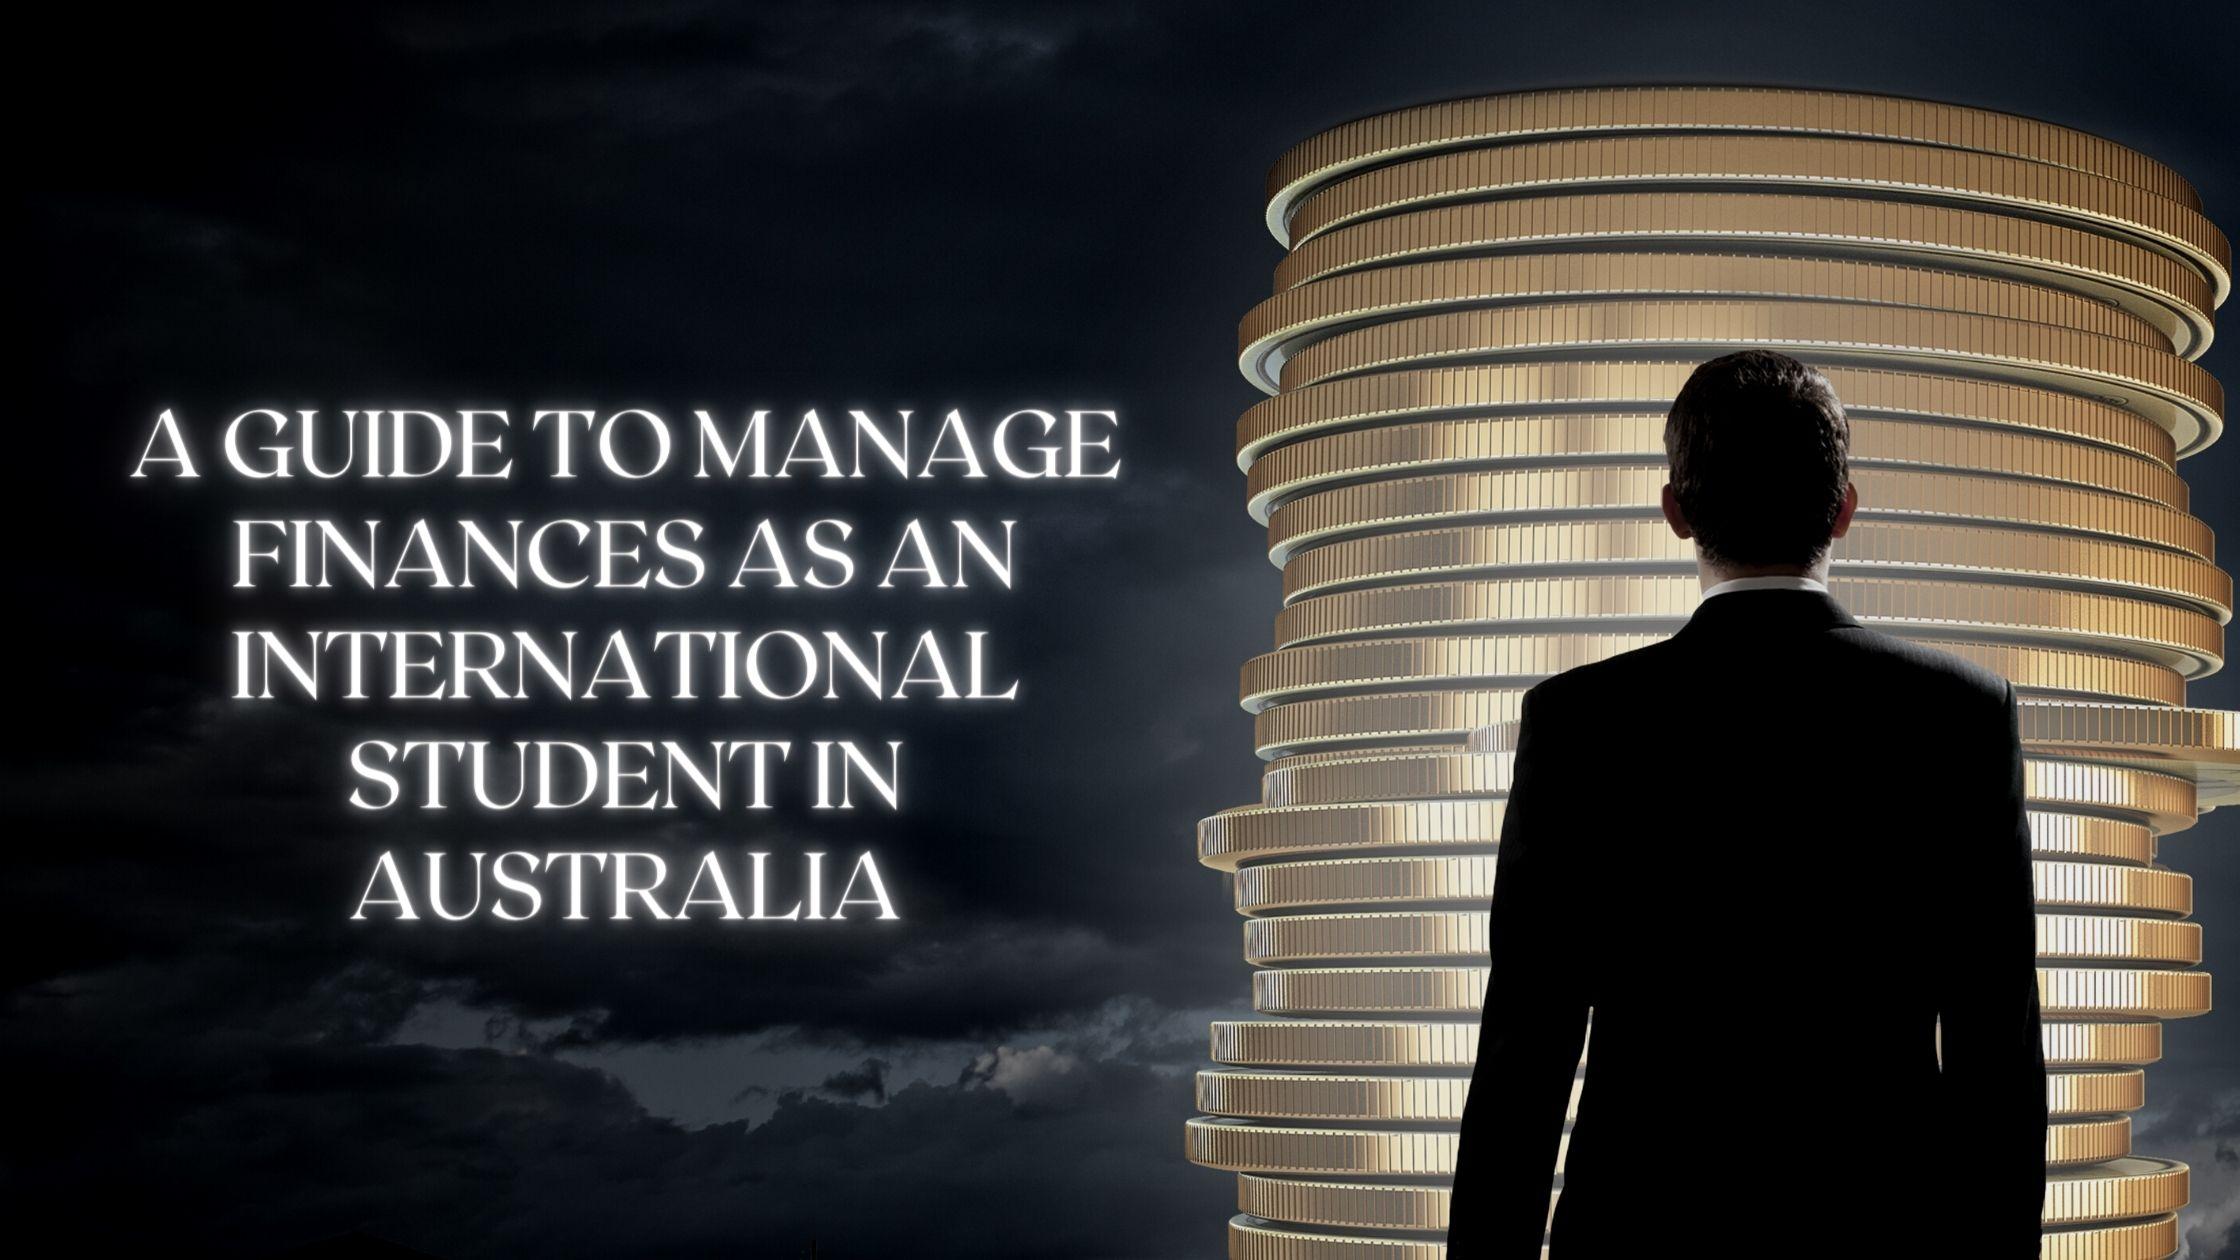 How to Manage Finances as an International Student in Australia